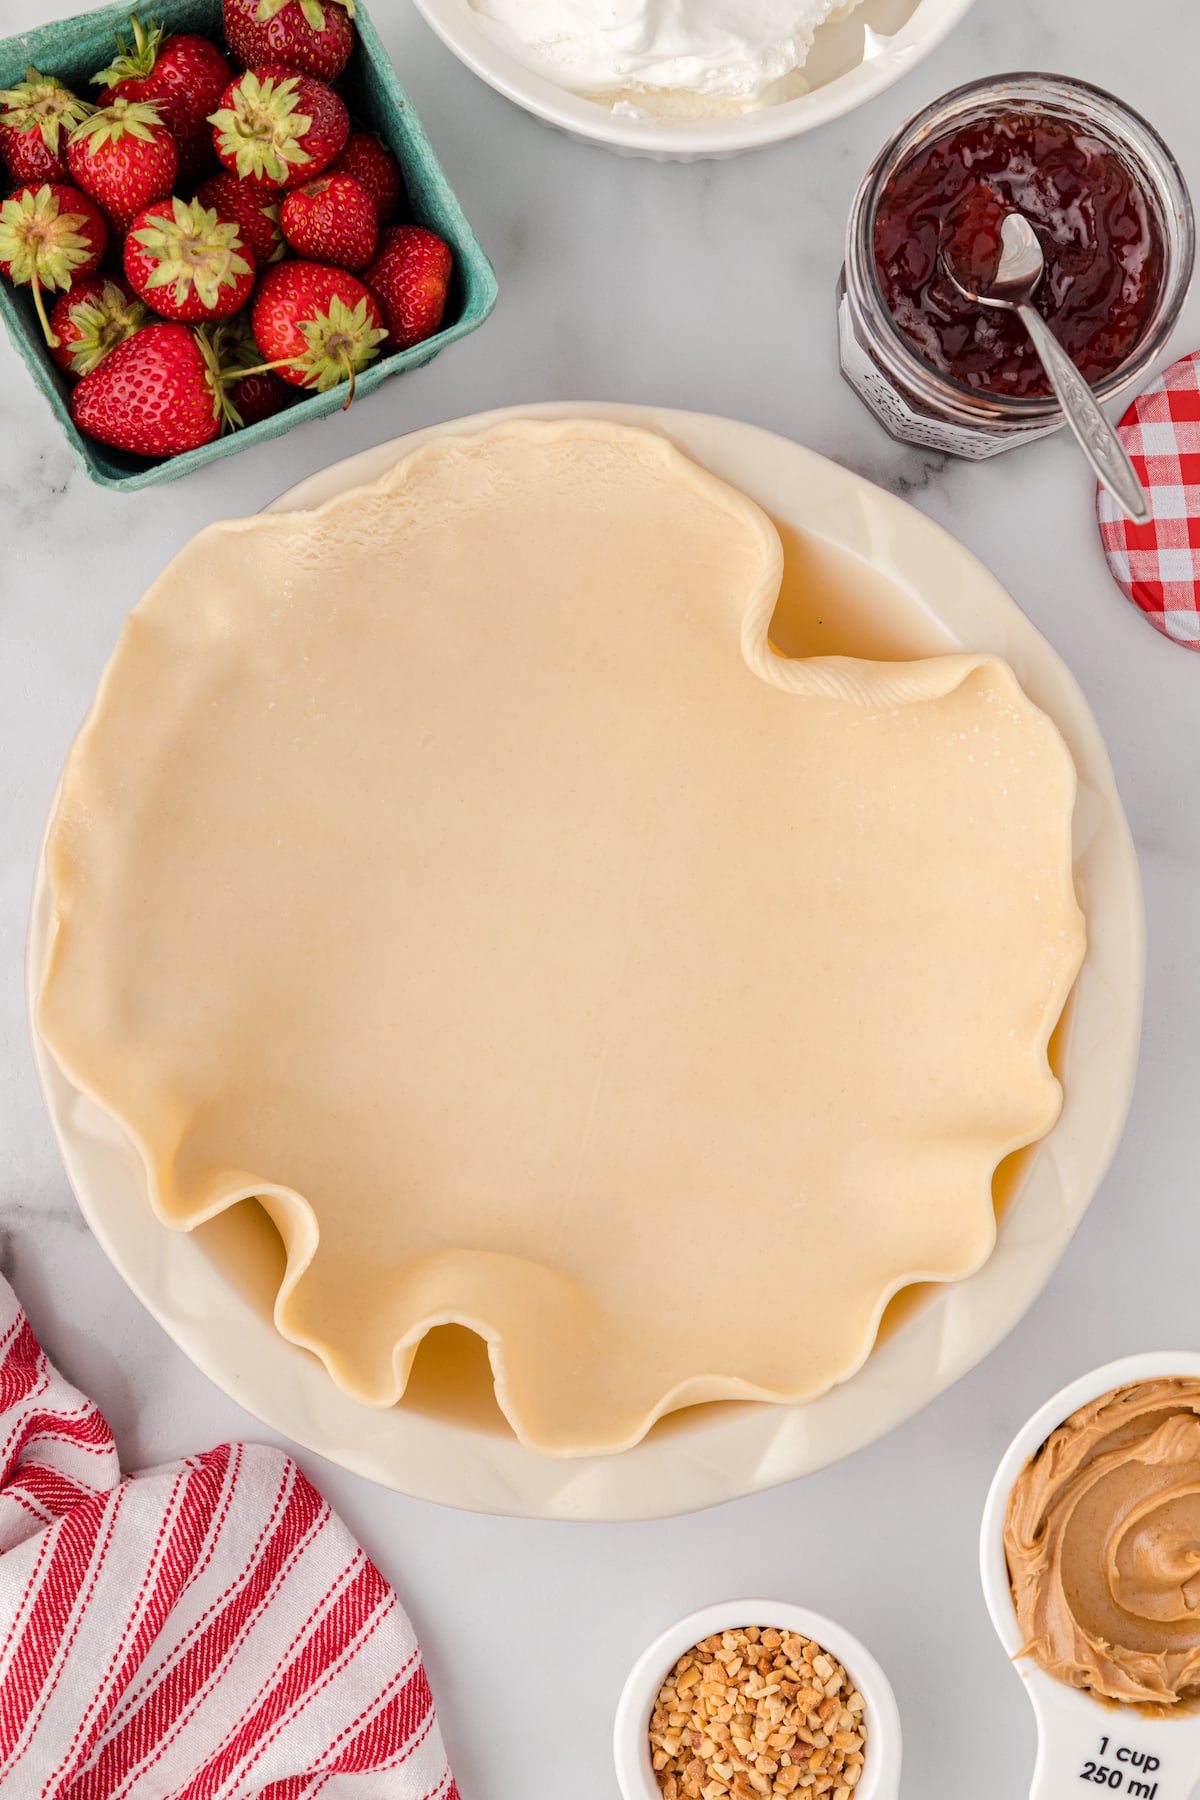 place an unbaked pie crust in a pie pan